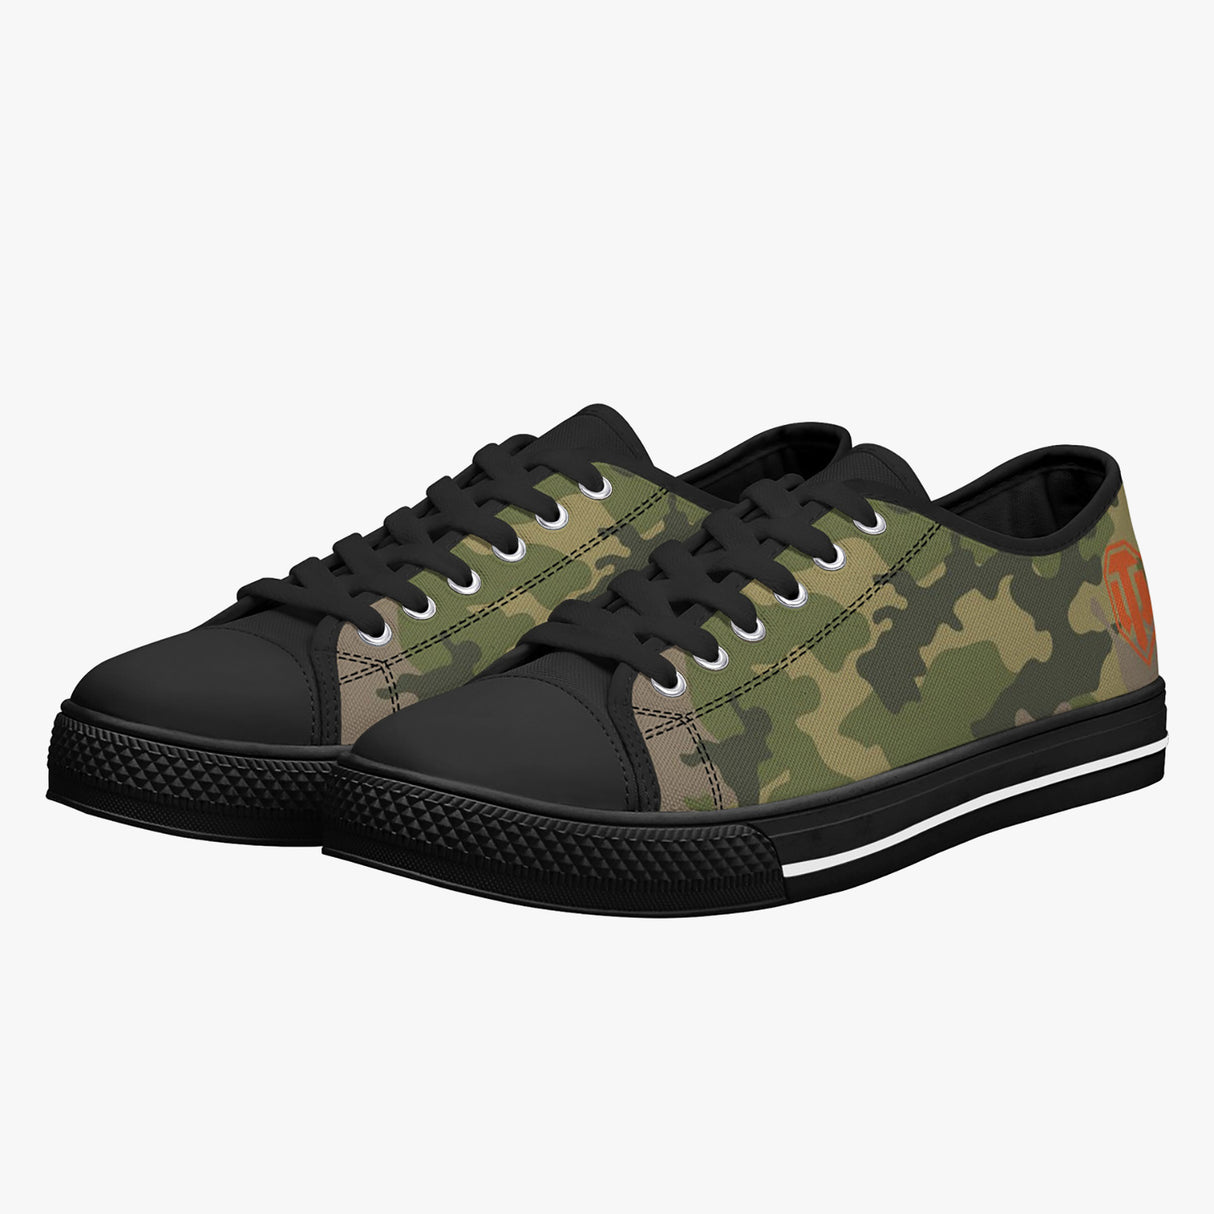 World of Tanks Low Top Canvas Trainer - Green Camo